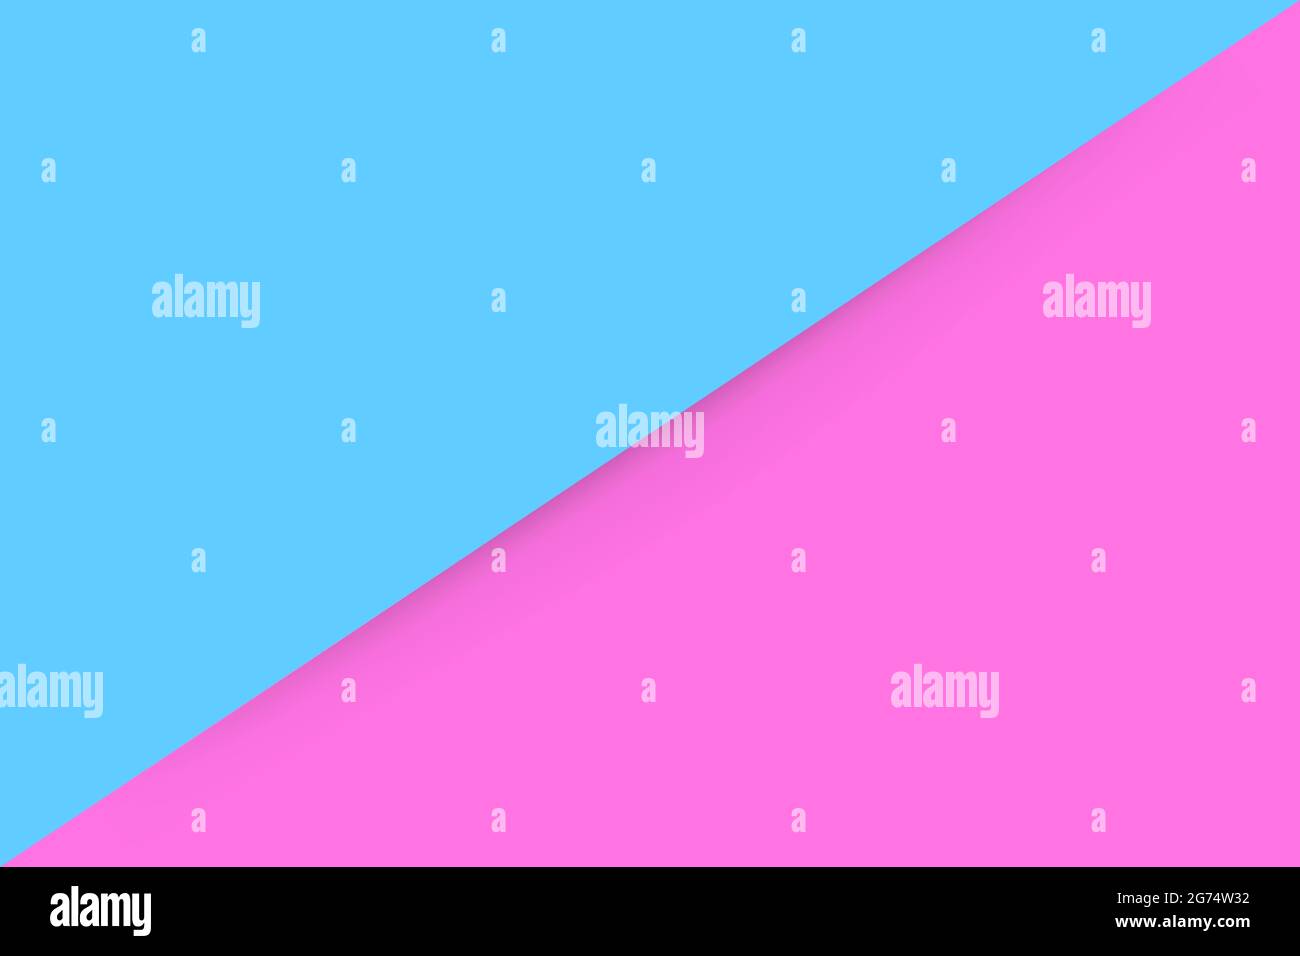 Template Triangle Blue and Pink with Diagonal Soft shadow for part or element design Stock Vector